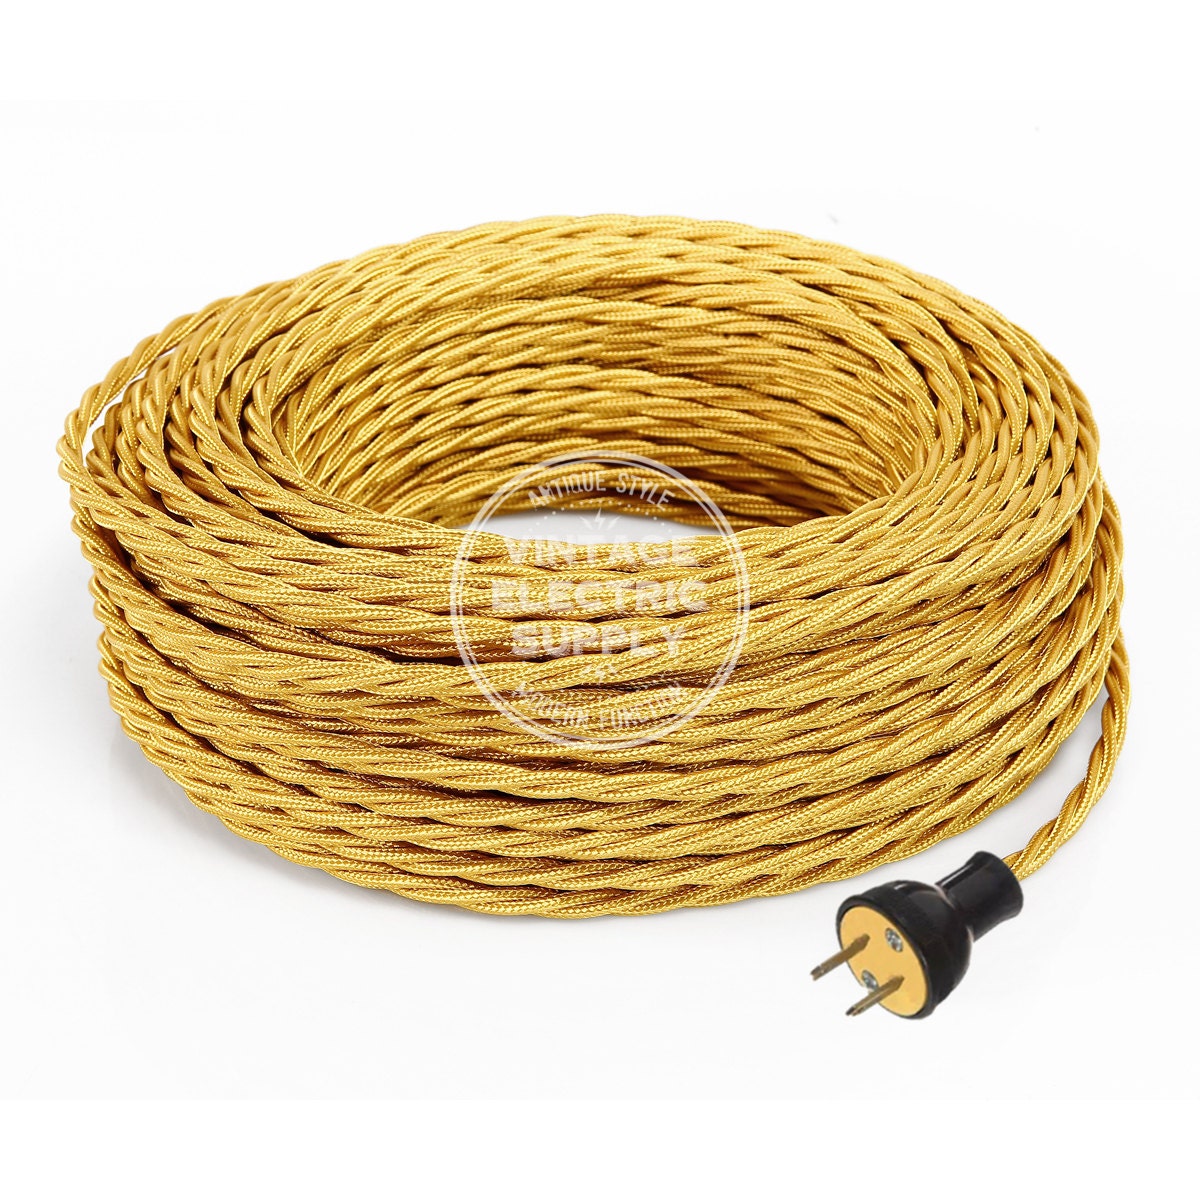 Gold Cloth Covered Cord Set with Antique Style Plug